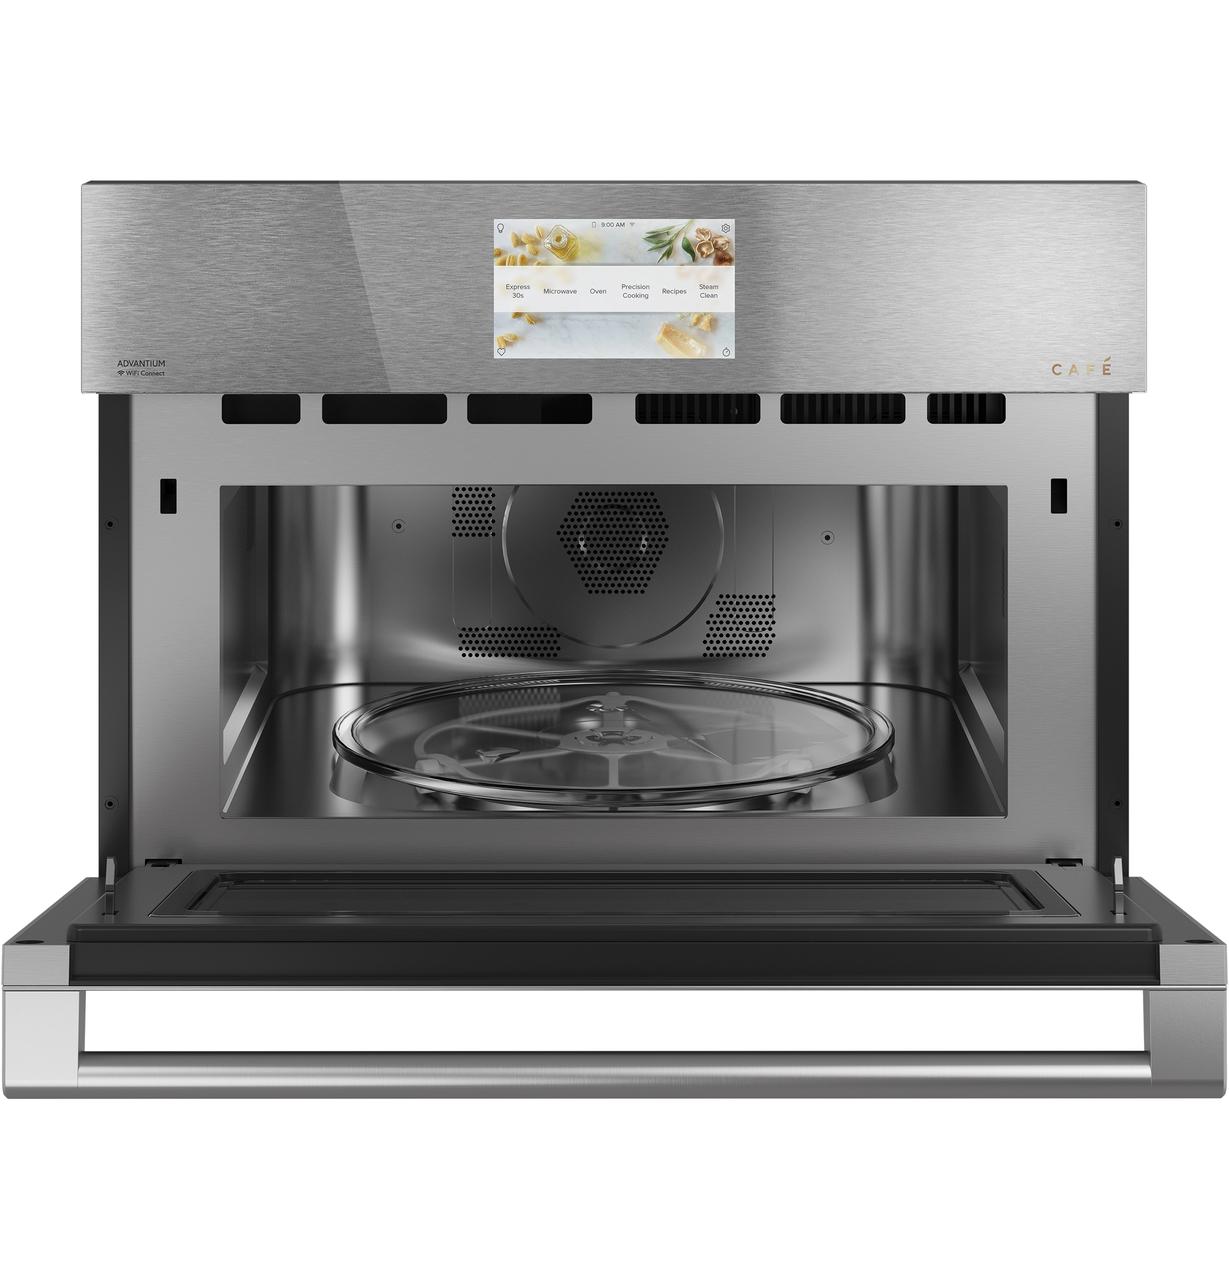 Cafe Caf(eback)™ 27" Smart Five in One Oven with 120V Advantium® Technology in Platinum Glass